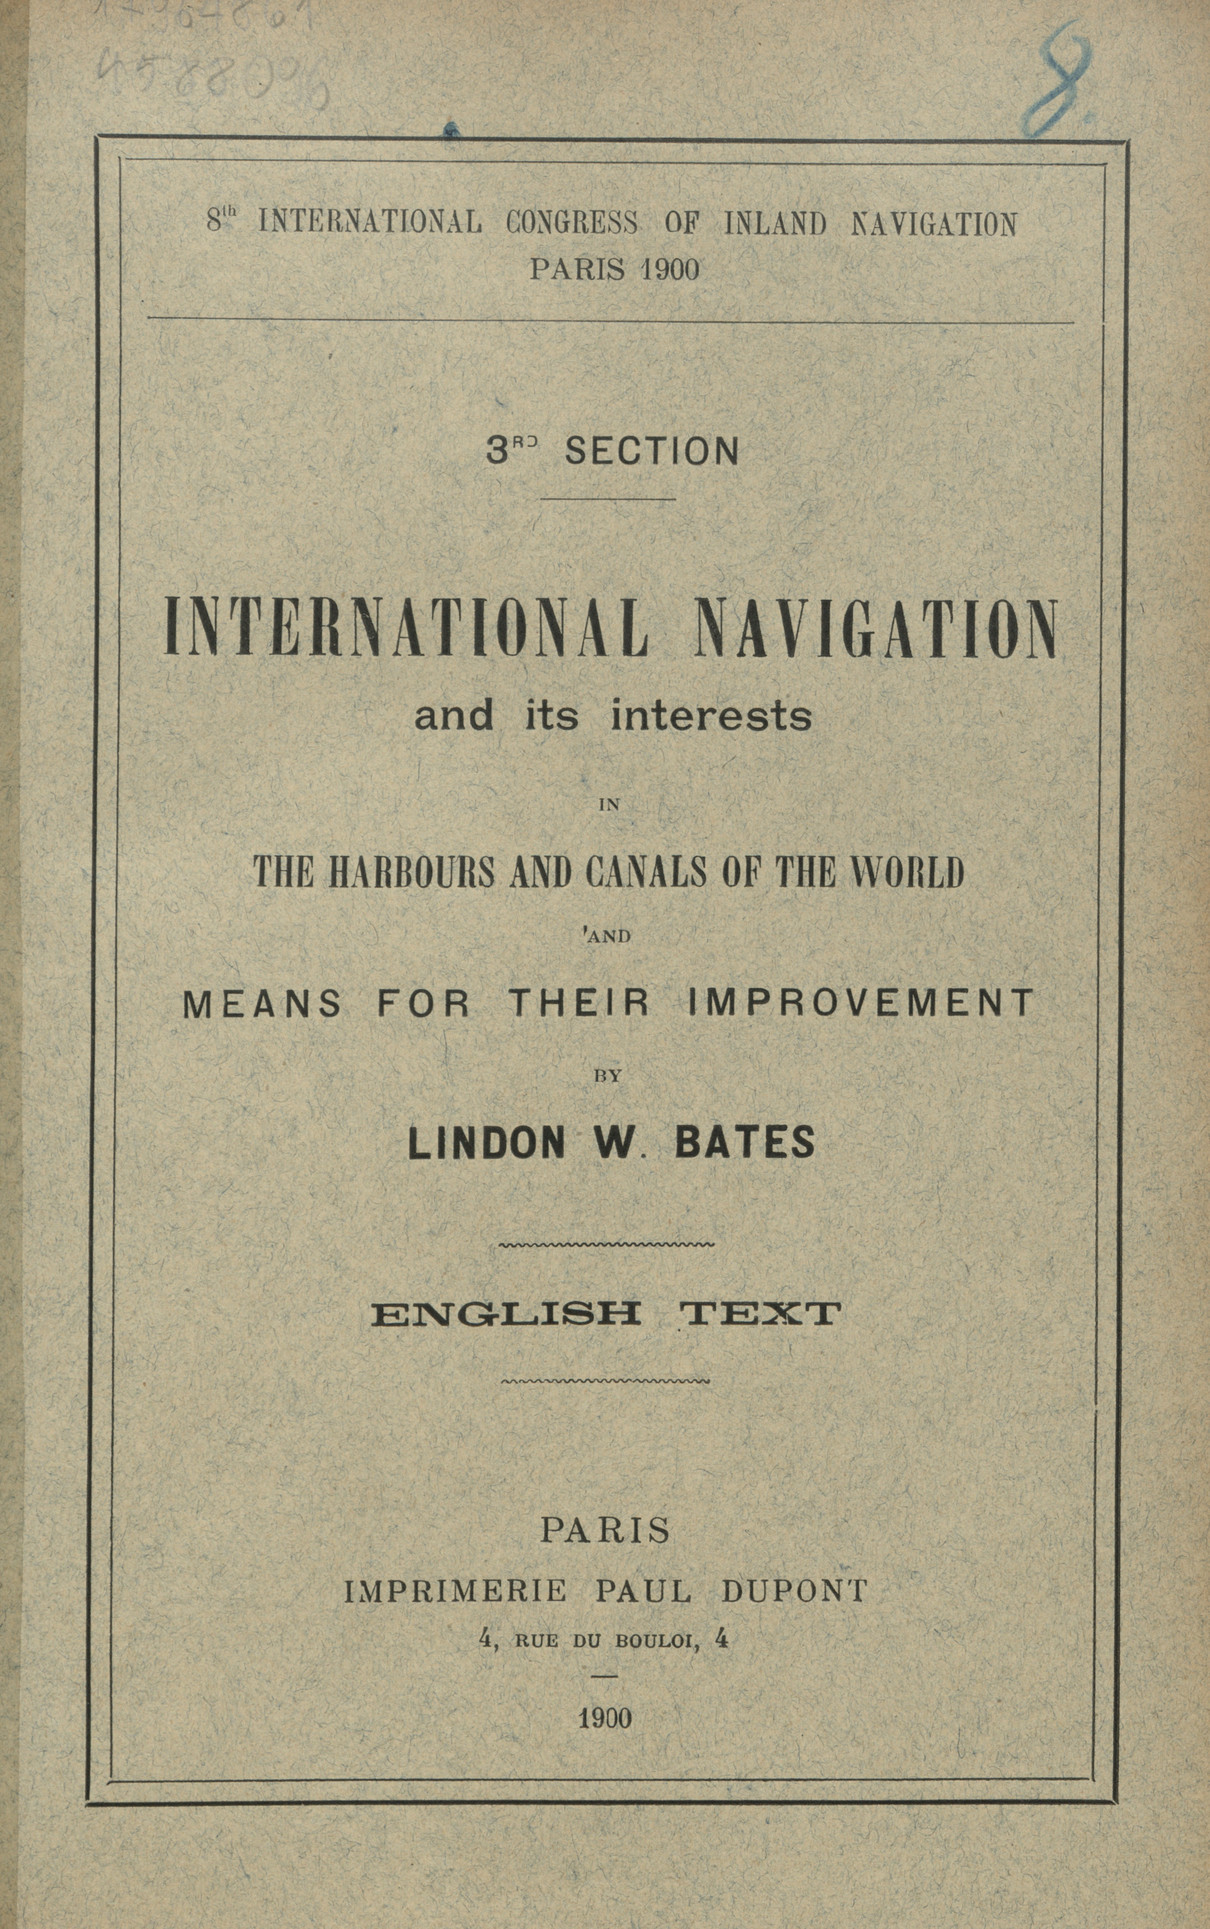 VIIIᵗʰ International Congress on Navigation, Paris - 1900. Sect. 3, The navigation interests of nations in ports and waterways, and modern means for their improvement